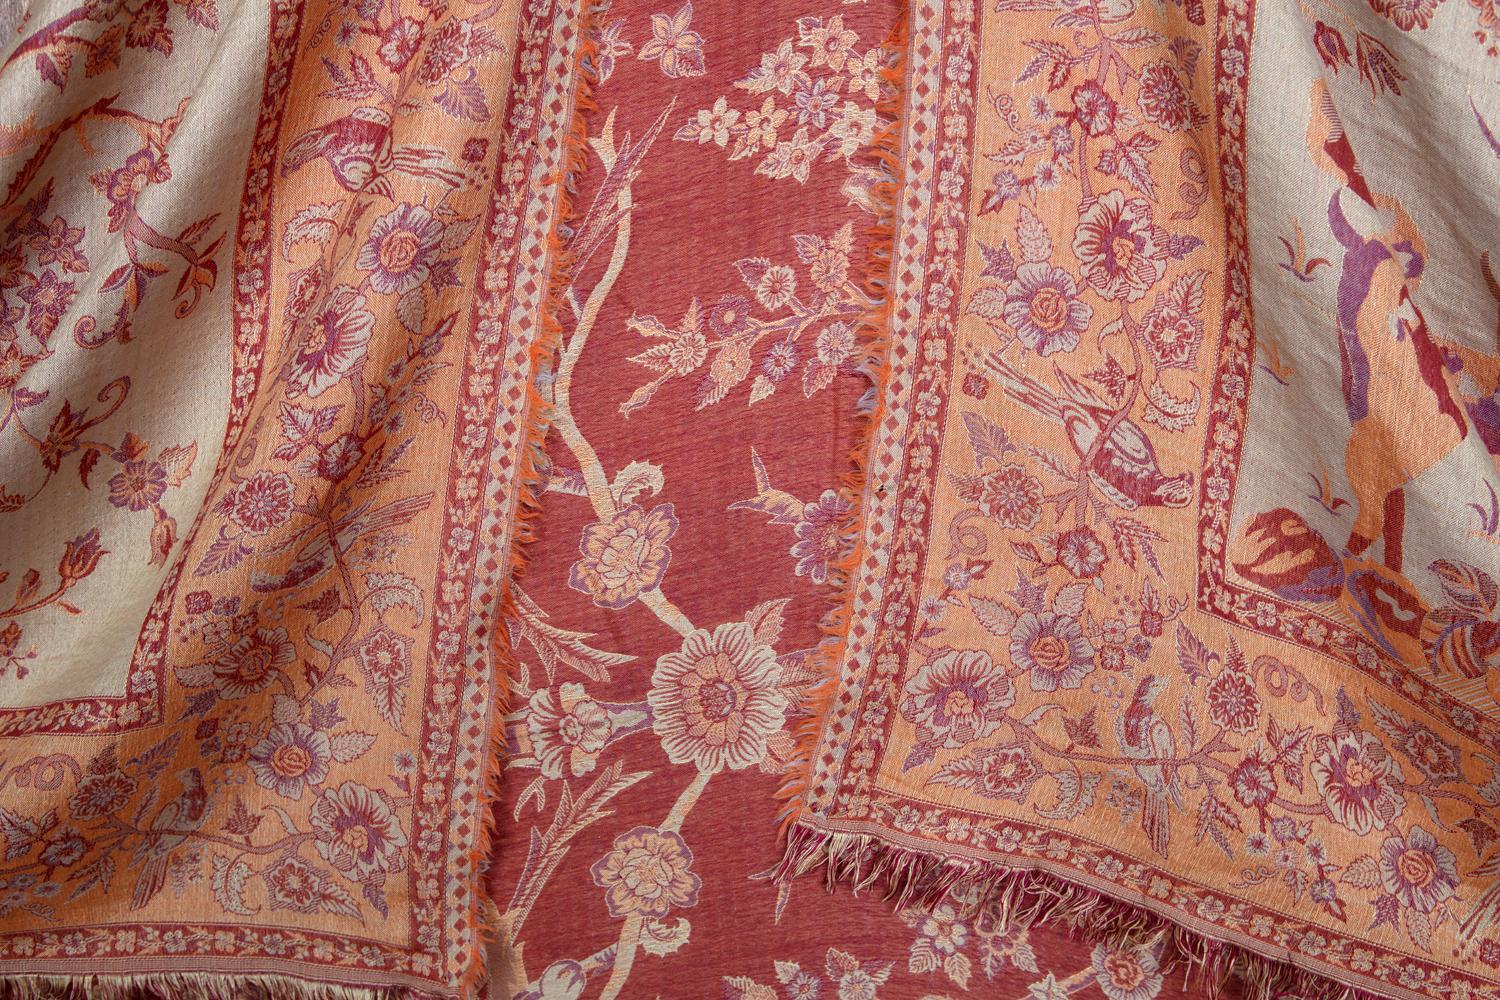 Woven Aubergine, Russet, & Taupe, Cashmere Pashmina Tree of Life & Indian Forest Tales For Sale